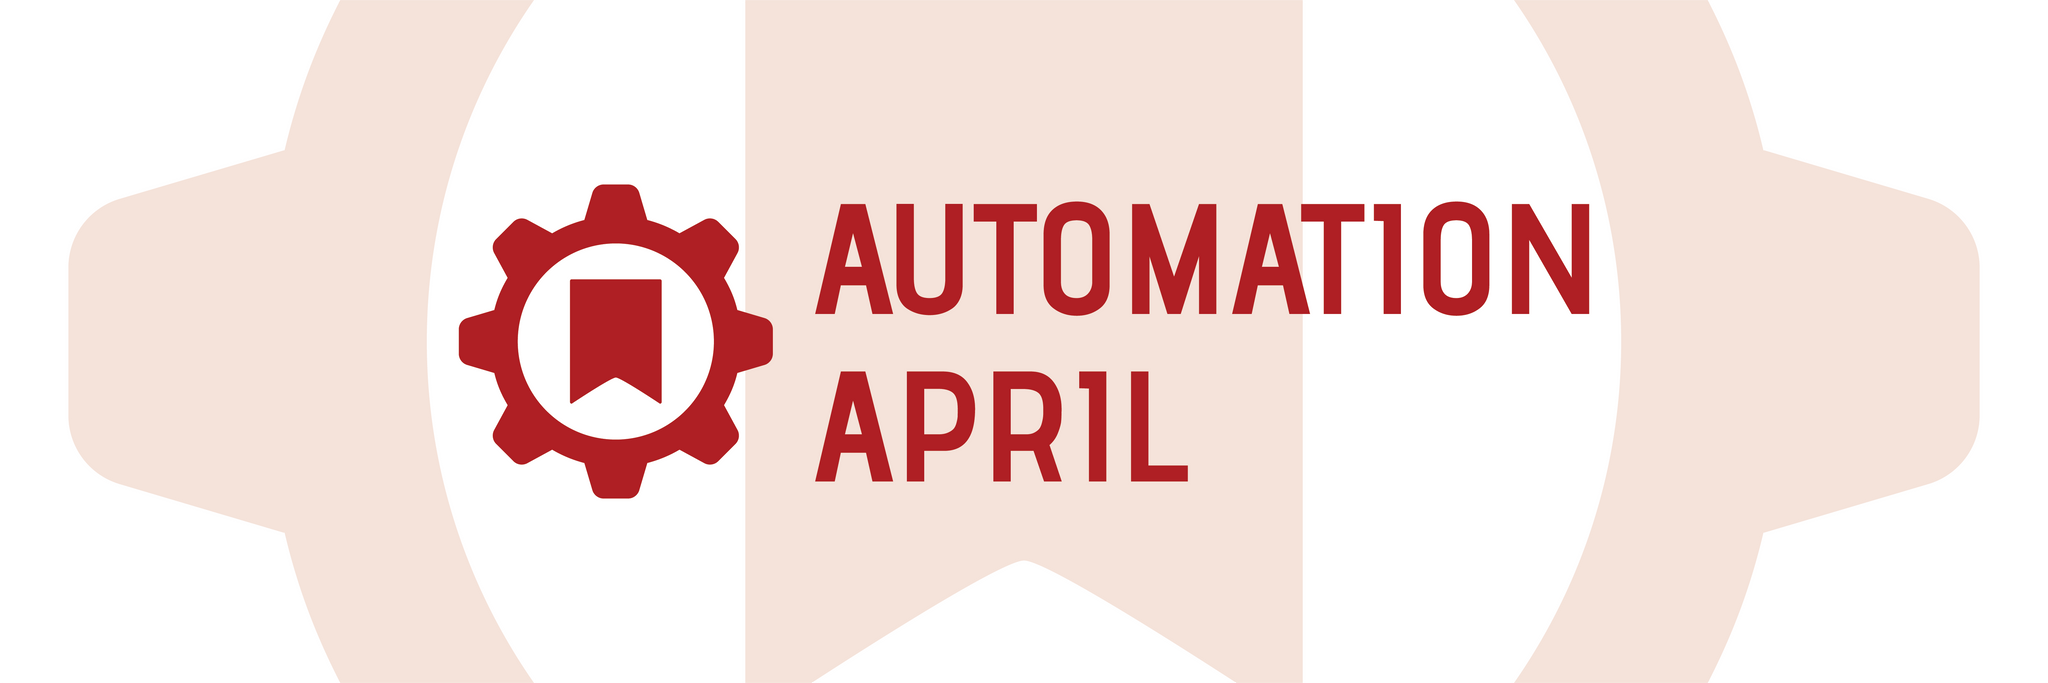 Coming Soon: The Second Annual Automation April Community Event Featuring Shortcuts, Interviews, Discord Workshops, and a Shortcut Contest